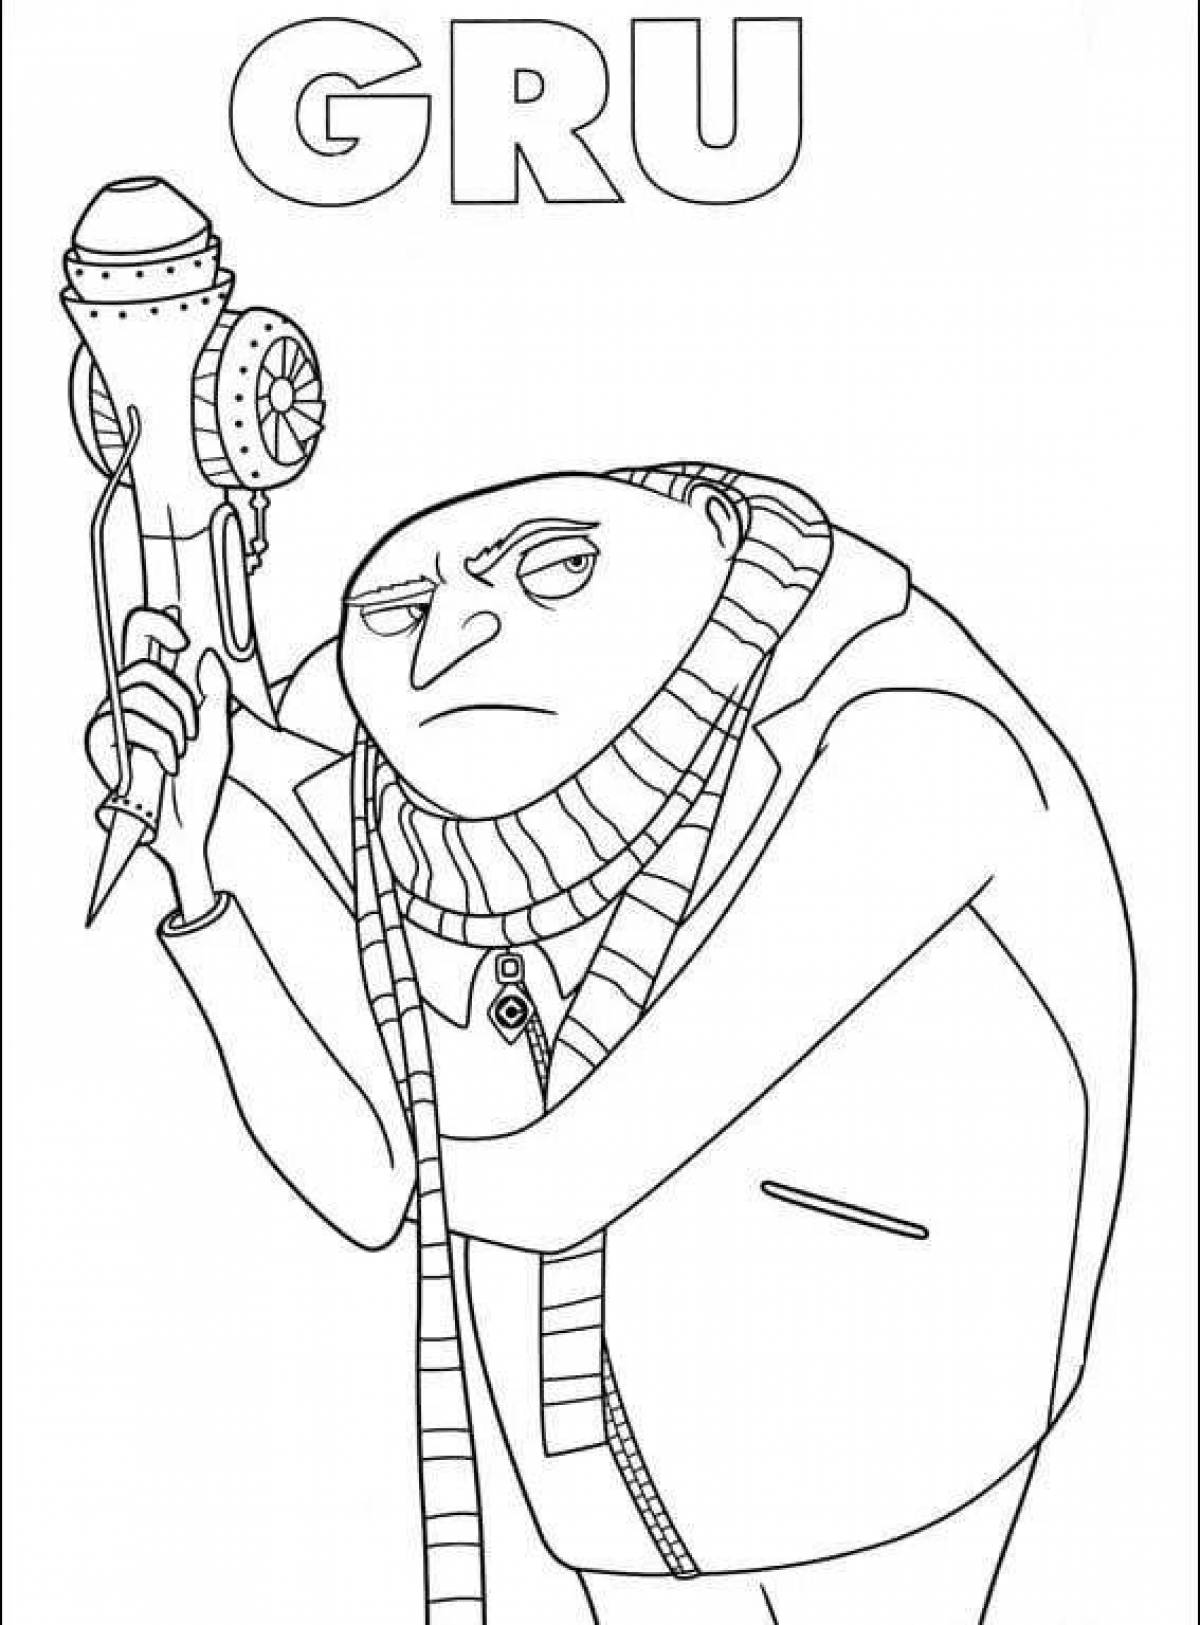 Coloring page charming gr